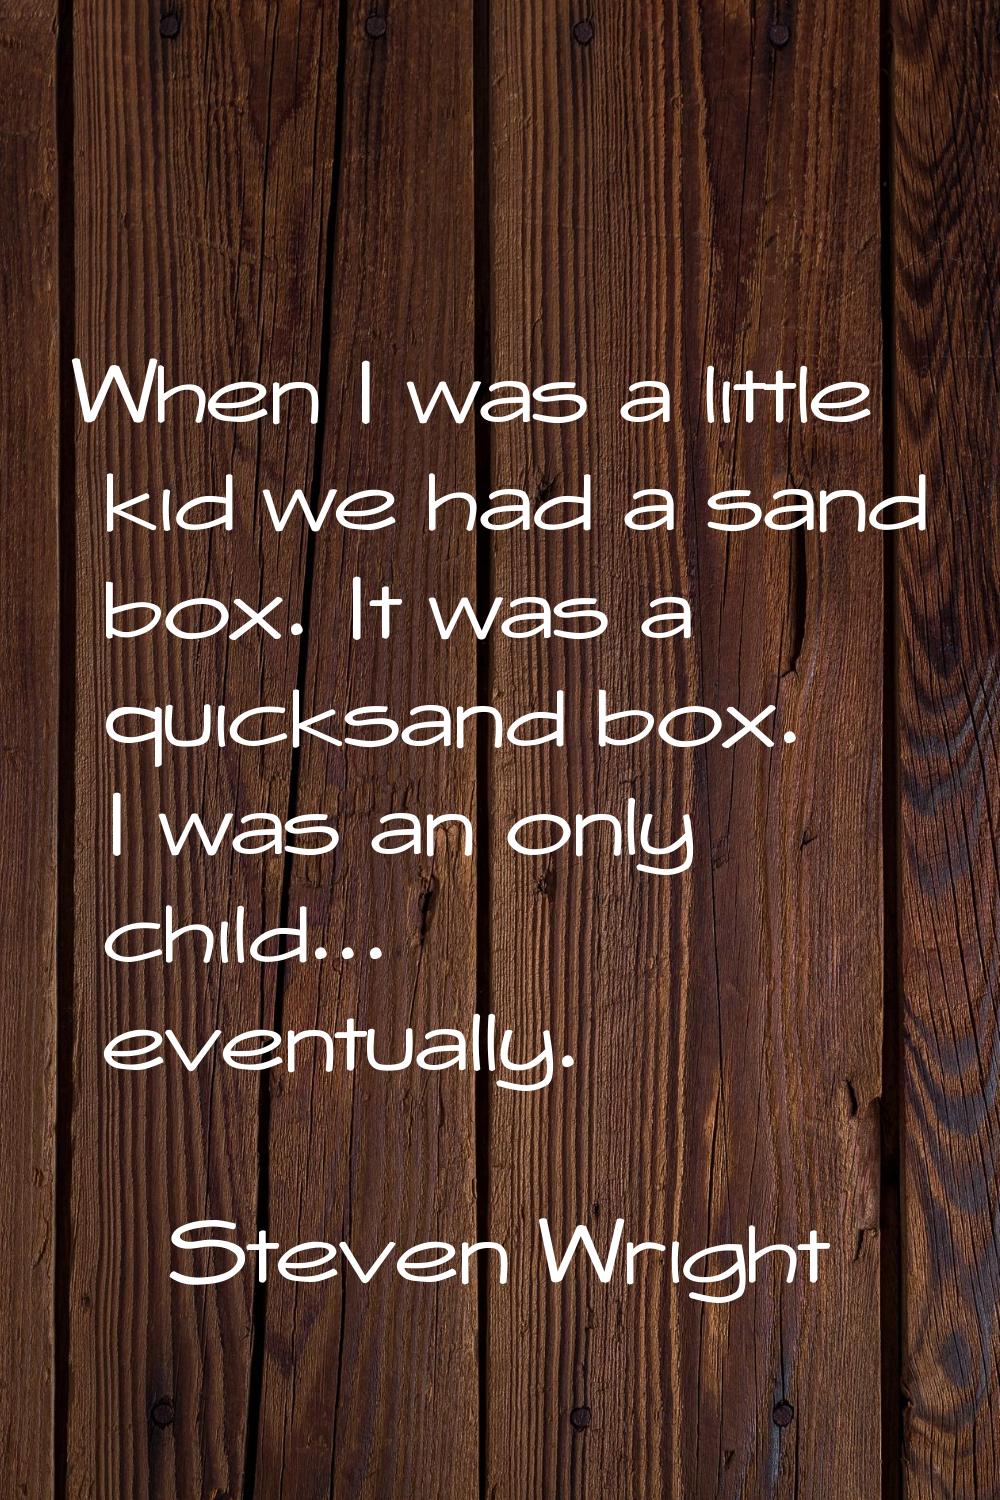 When I was a little kid we had a sand box. It was a quicksand box. I was an only child... eventuall